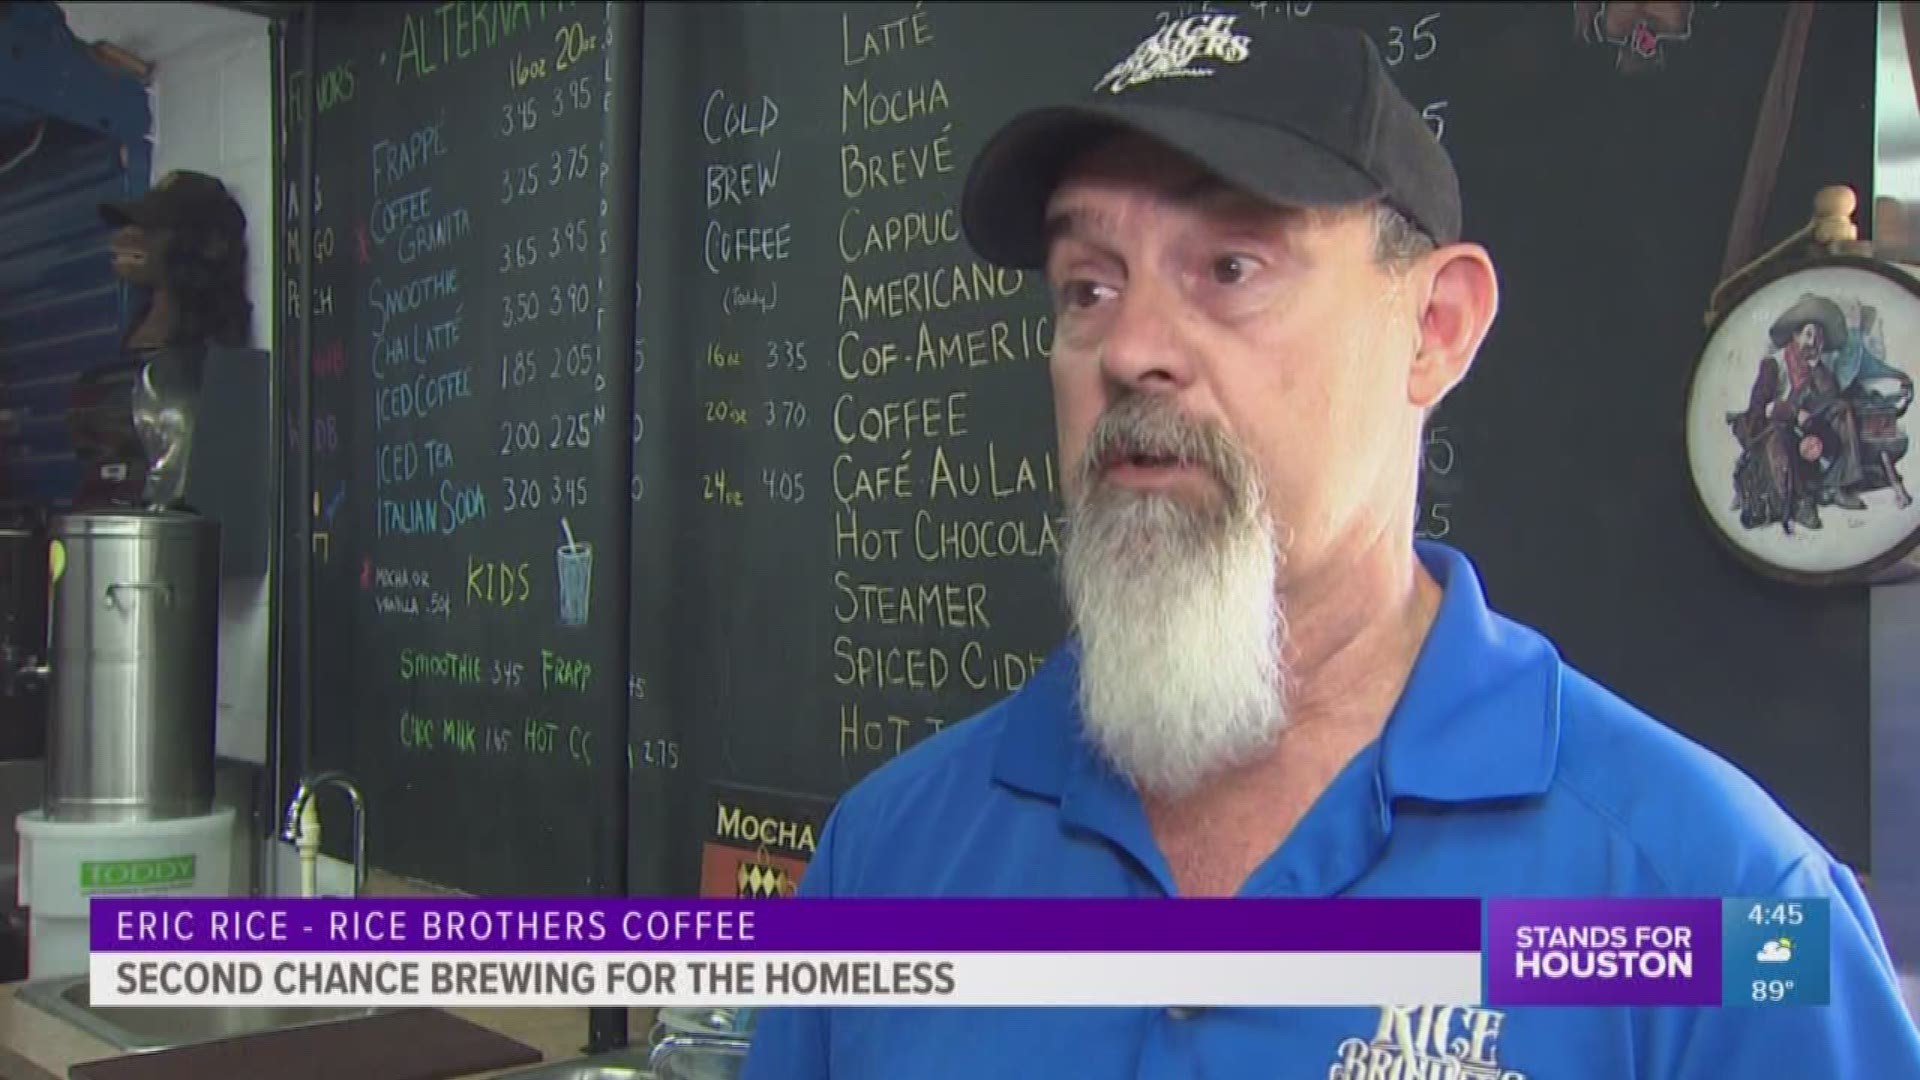 Two brothers in northwest Harris County are standing for Houston by helping the homeless get off the streets using two different approaches.